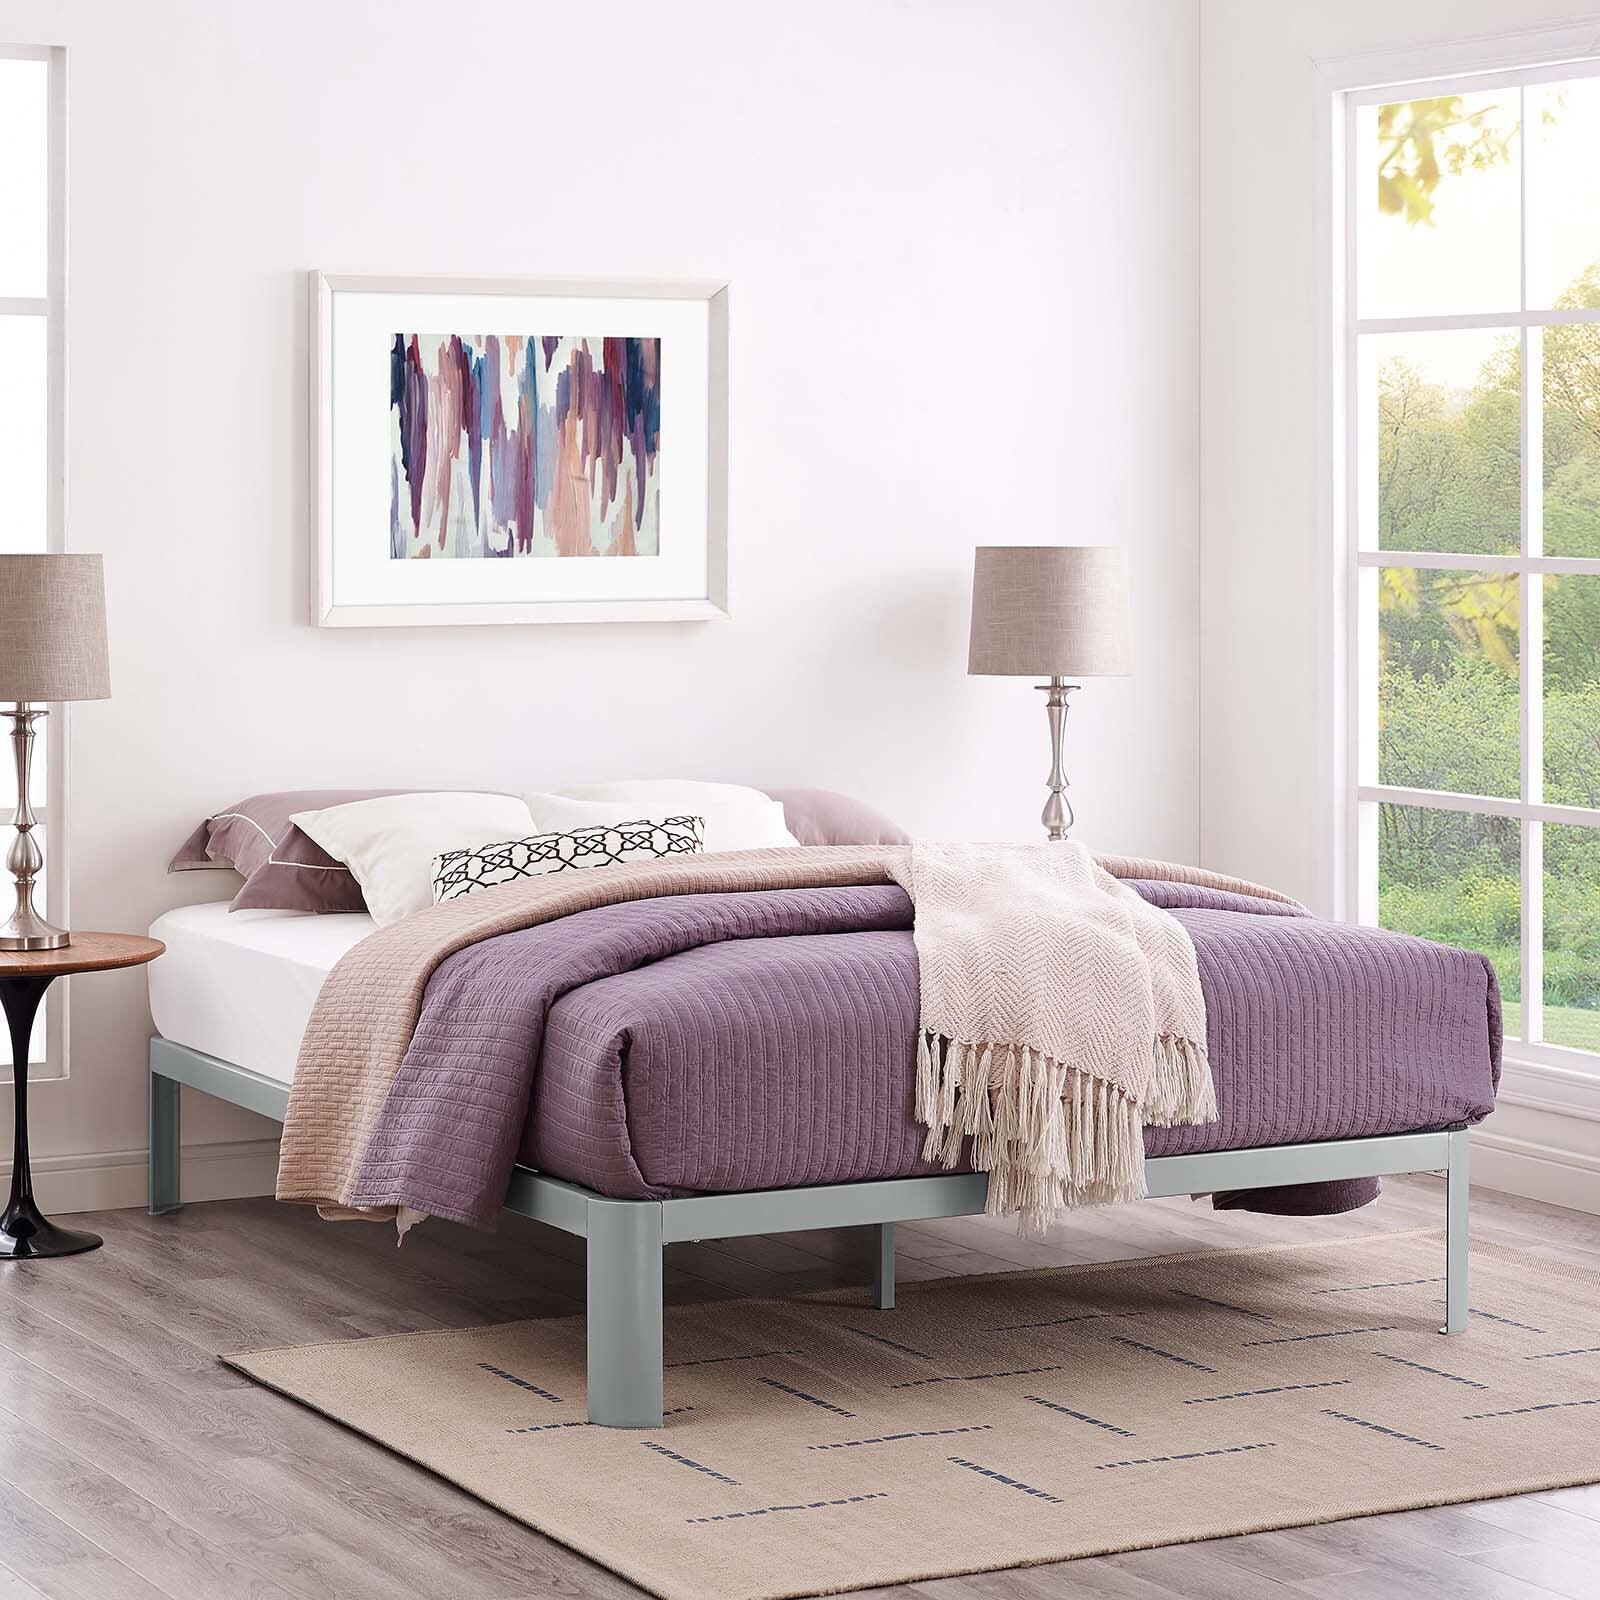 Modway Beds - Corinne King Bed Frame Gray